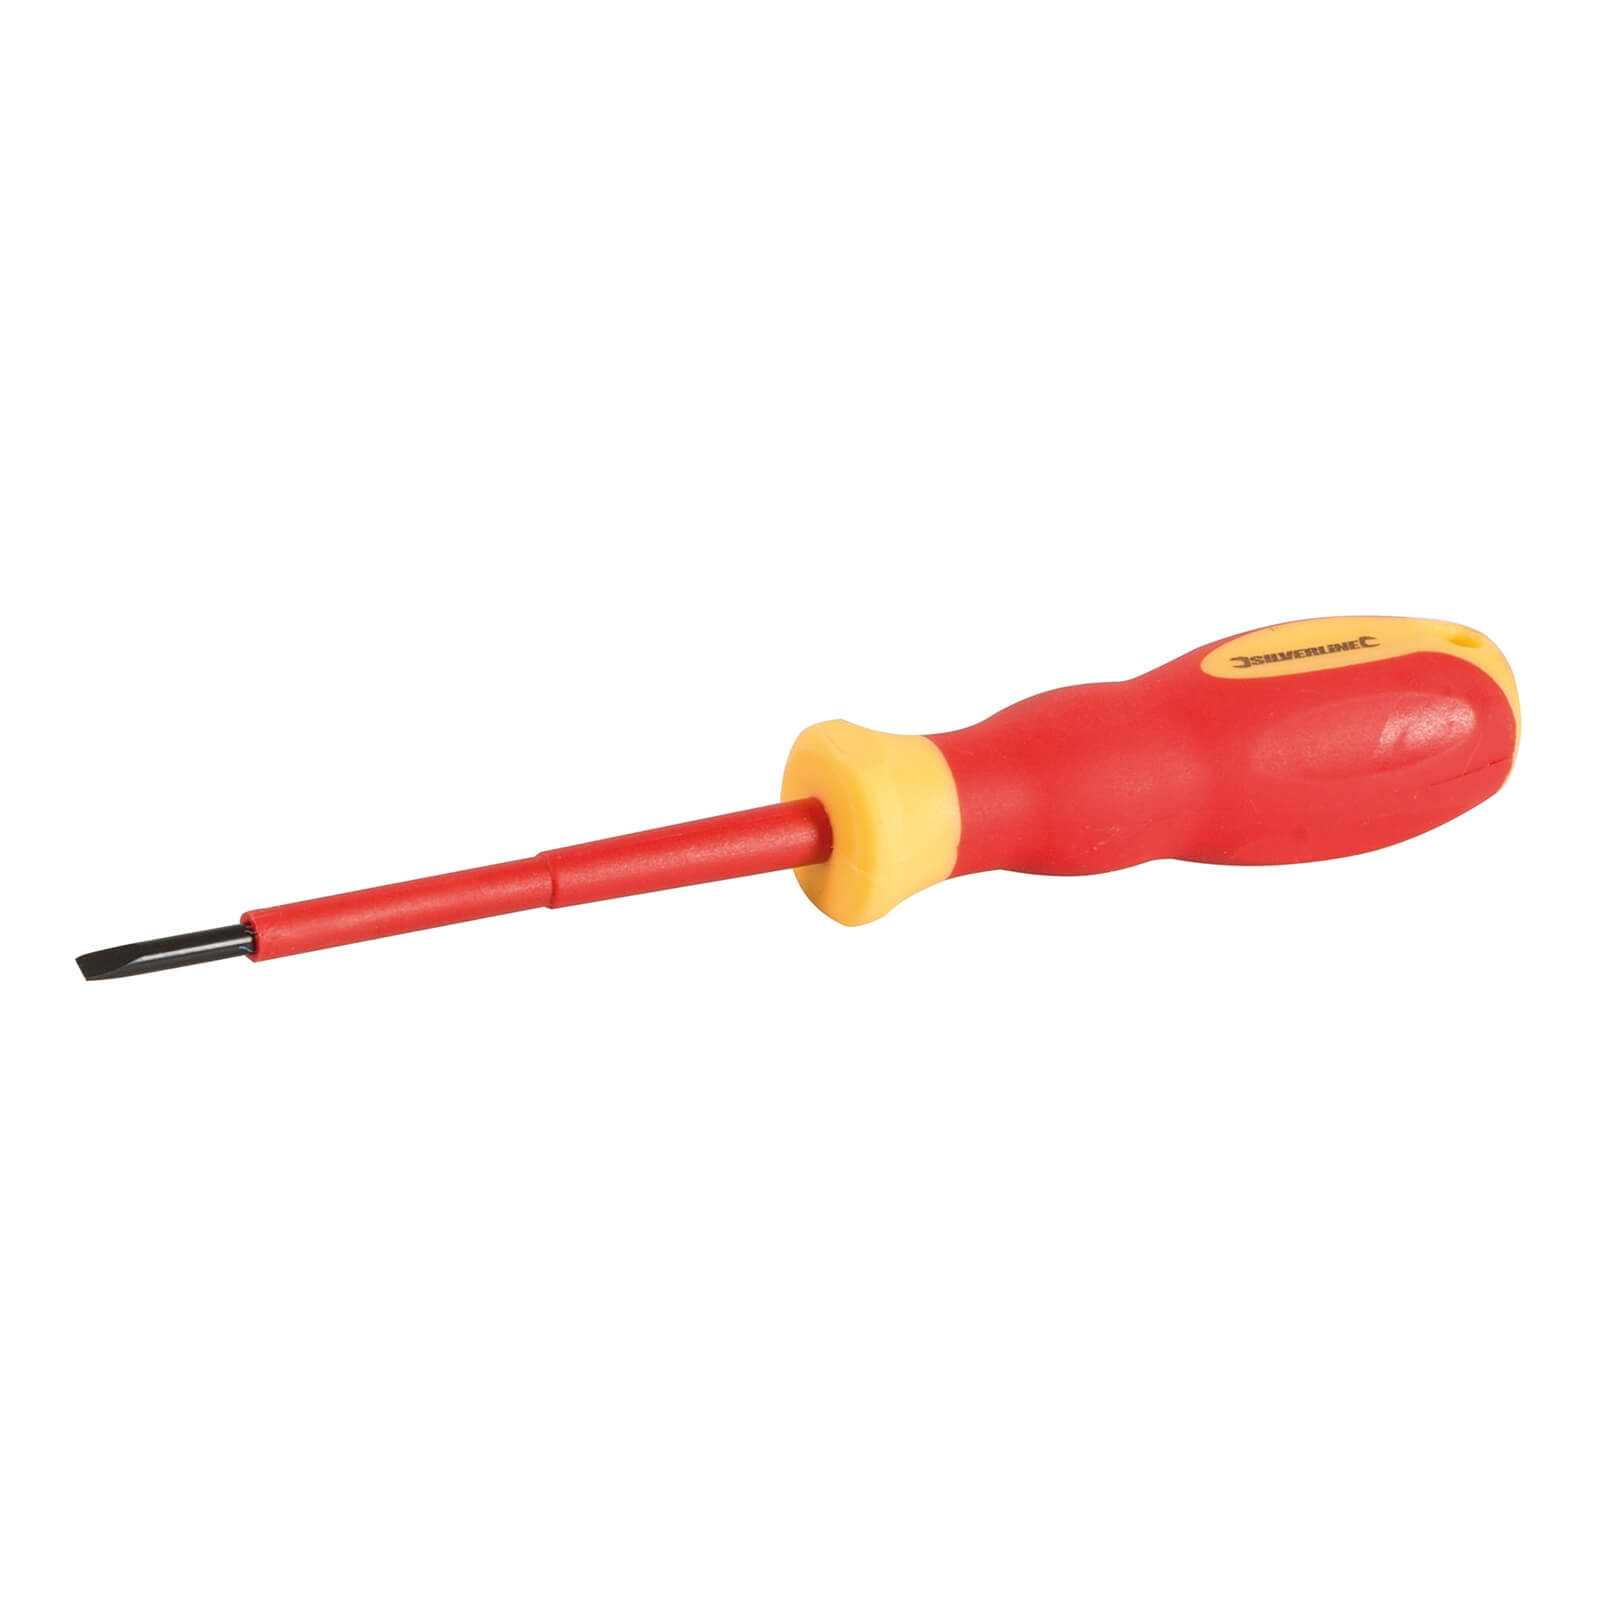 Silverline VDE Soft-Grip Electricians Screwdriver Slotted 0.5 x 3 x 75mm